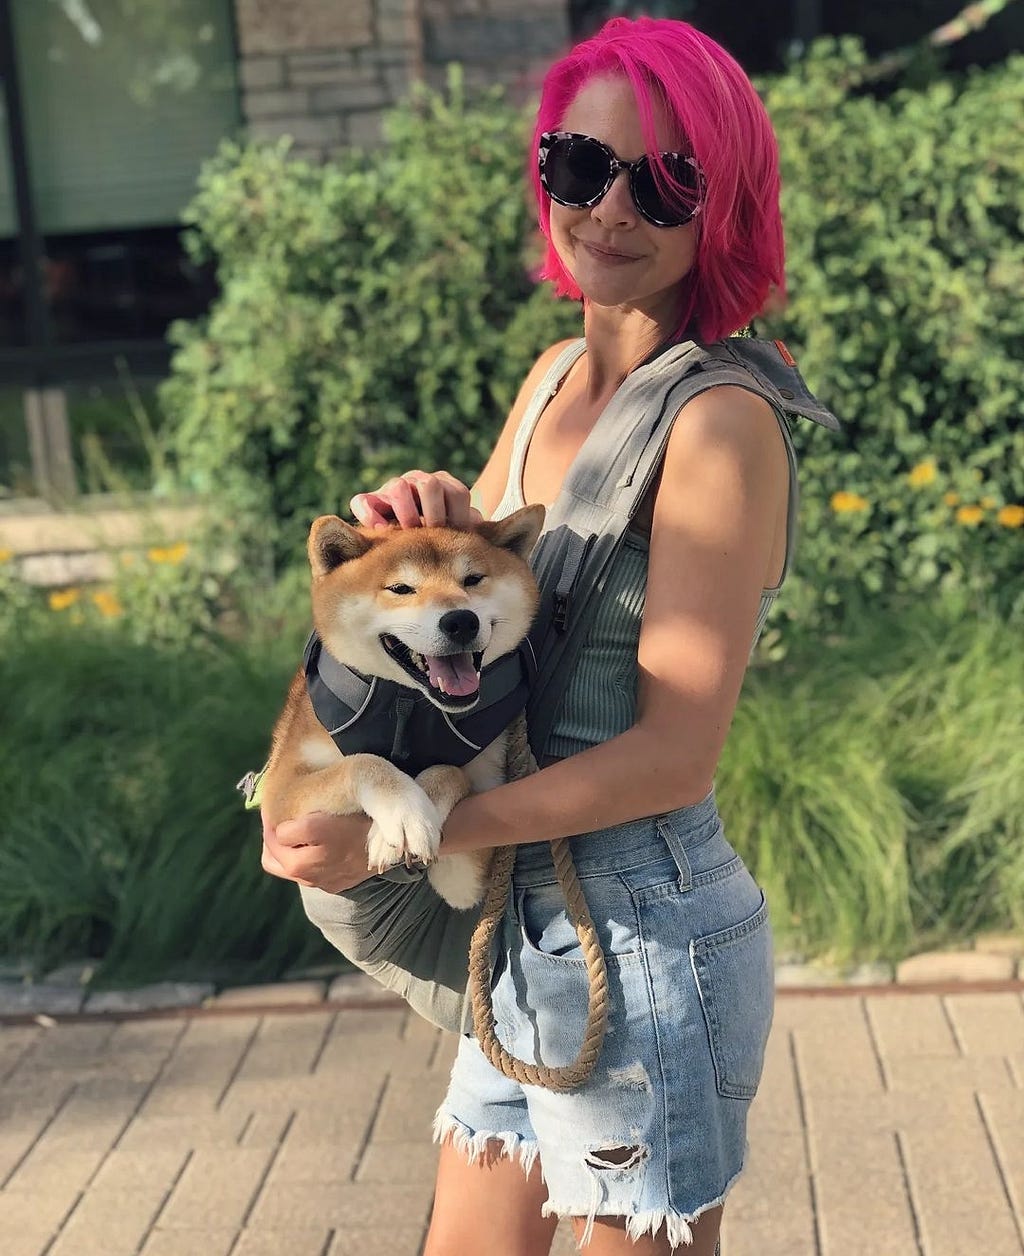 A red and cream Shiba Inu being held in a sling by a woman smiling at the camera with bright pink hair and dark sunglasses on.